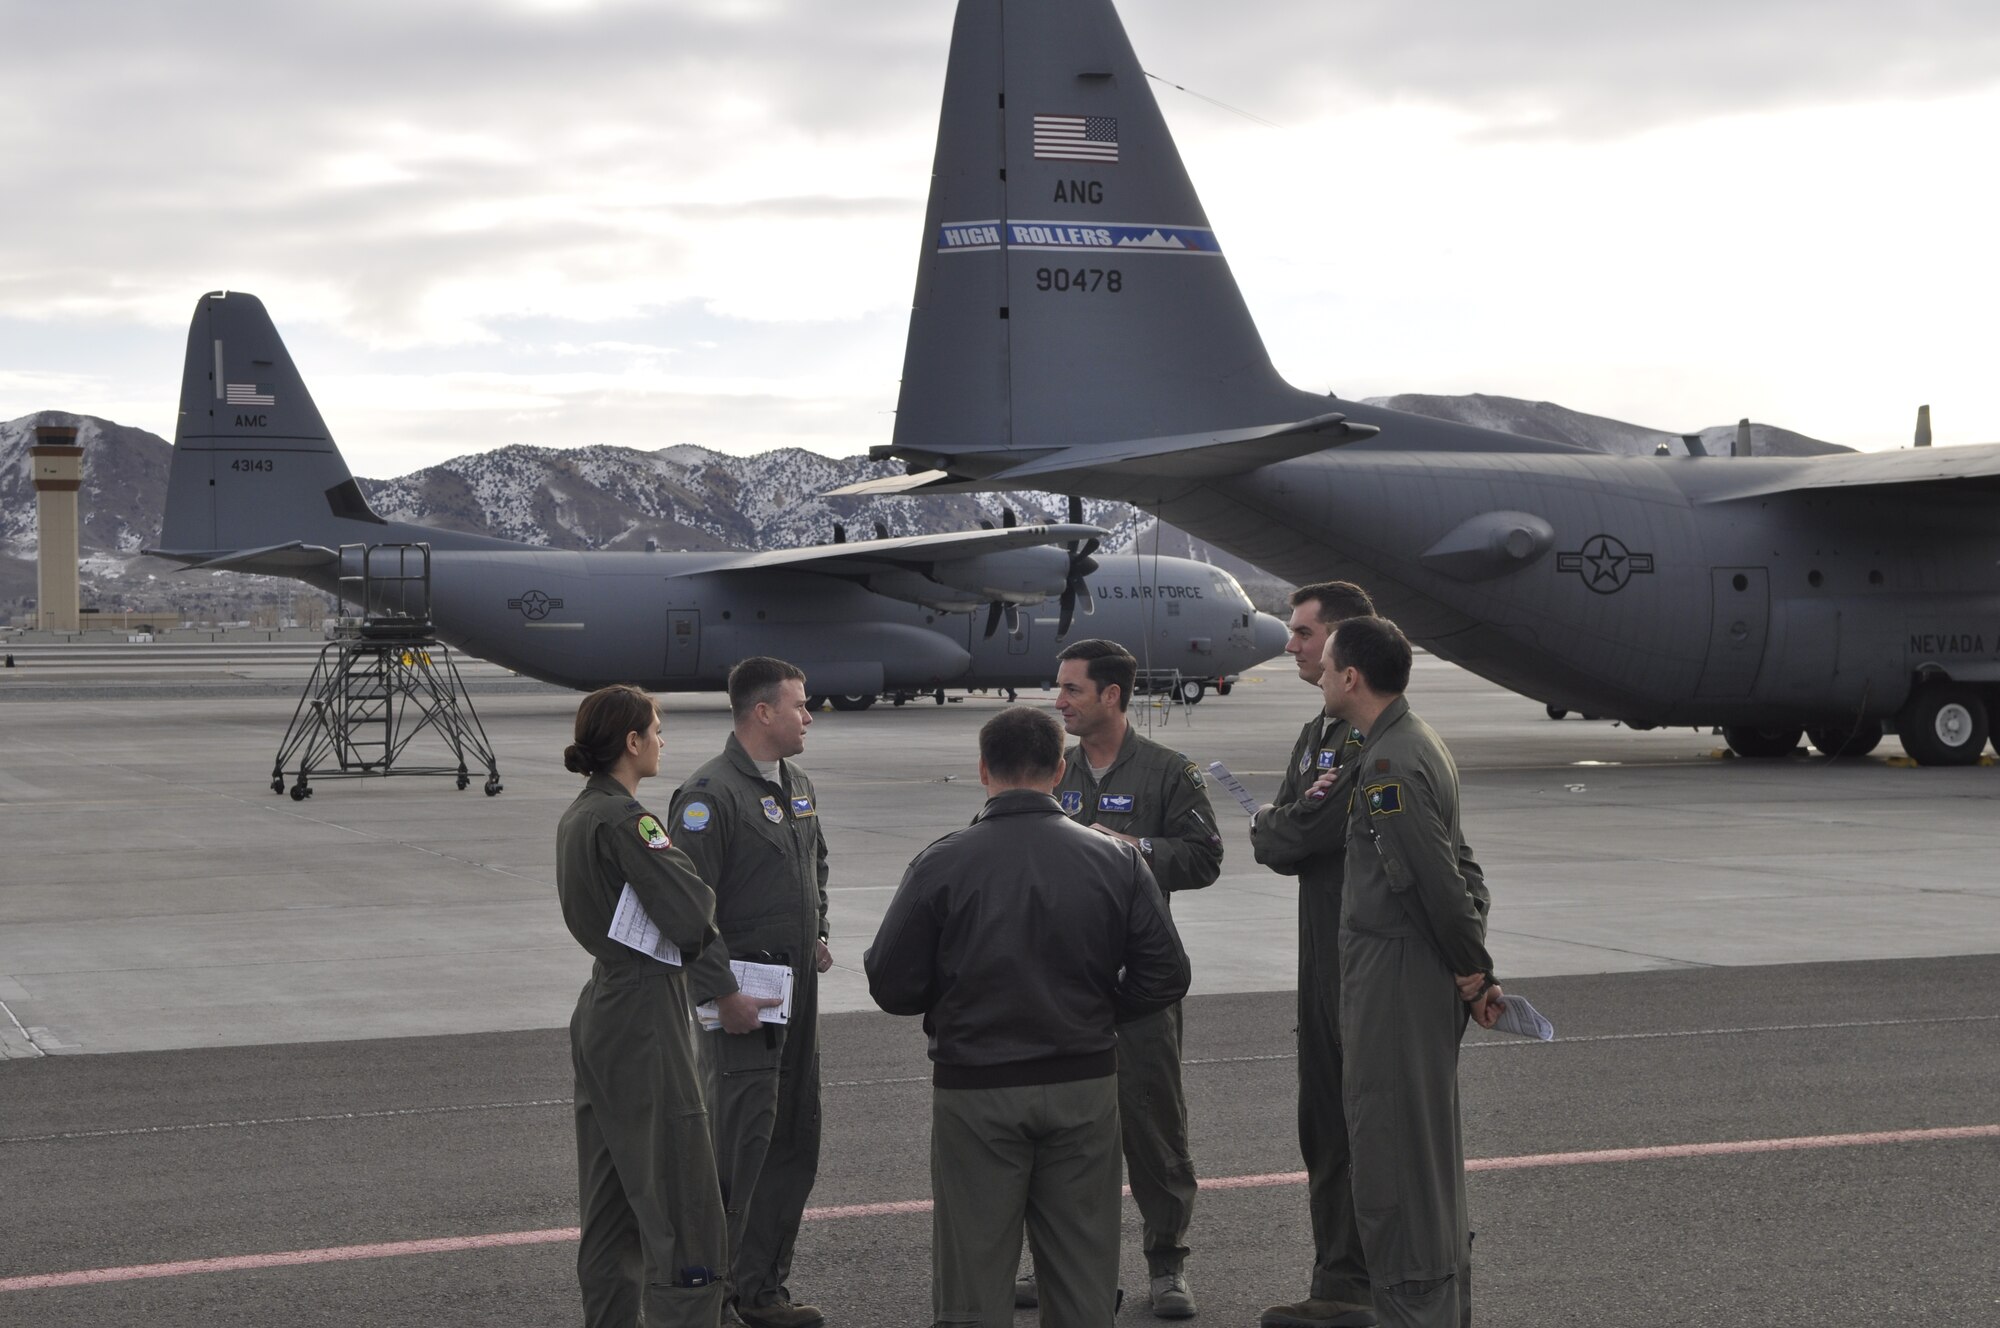 Lt. Col. Jeff Zupon (center, facing camera) and other members of the 192nd Airflift Squadron discuss interfly operations with members of the 41st Airlift Squardon prior to takeoff from the Nevada Air National Guard Base, Reno, Nev.  The 41st Airlift Squadron was in Reno to practice mountain flying and to conduct other training prior to deploying to Afghanistan.  (USAF photo by Capt. Jason Yuhasz released).
